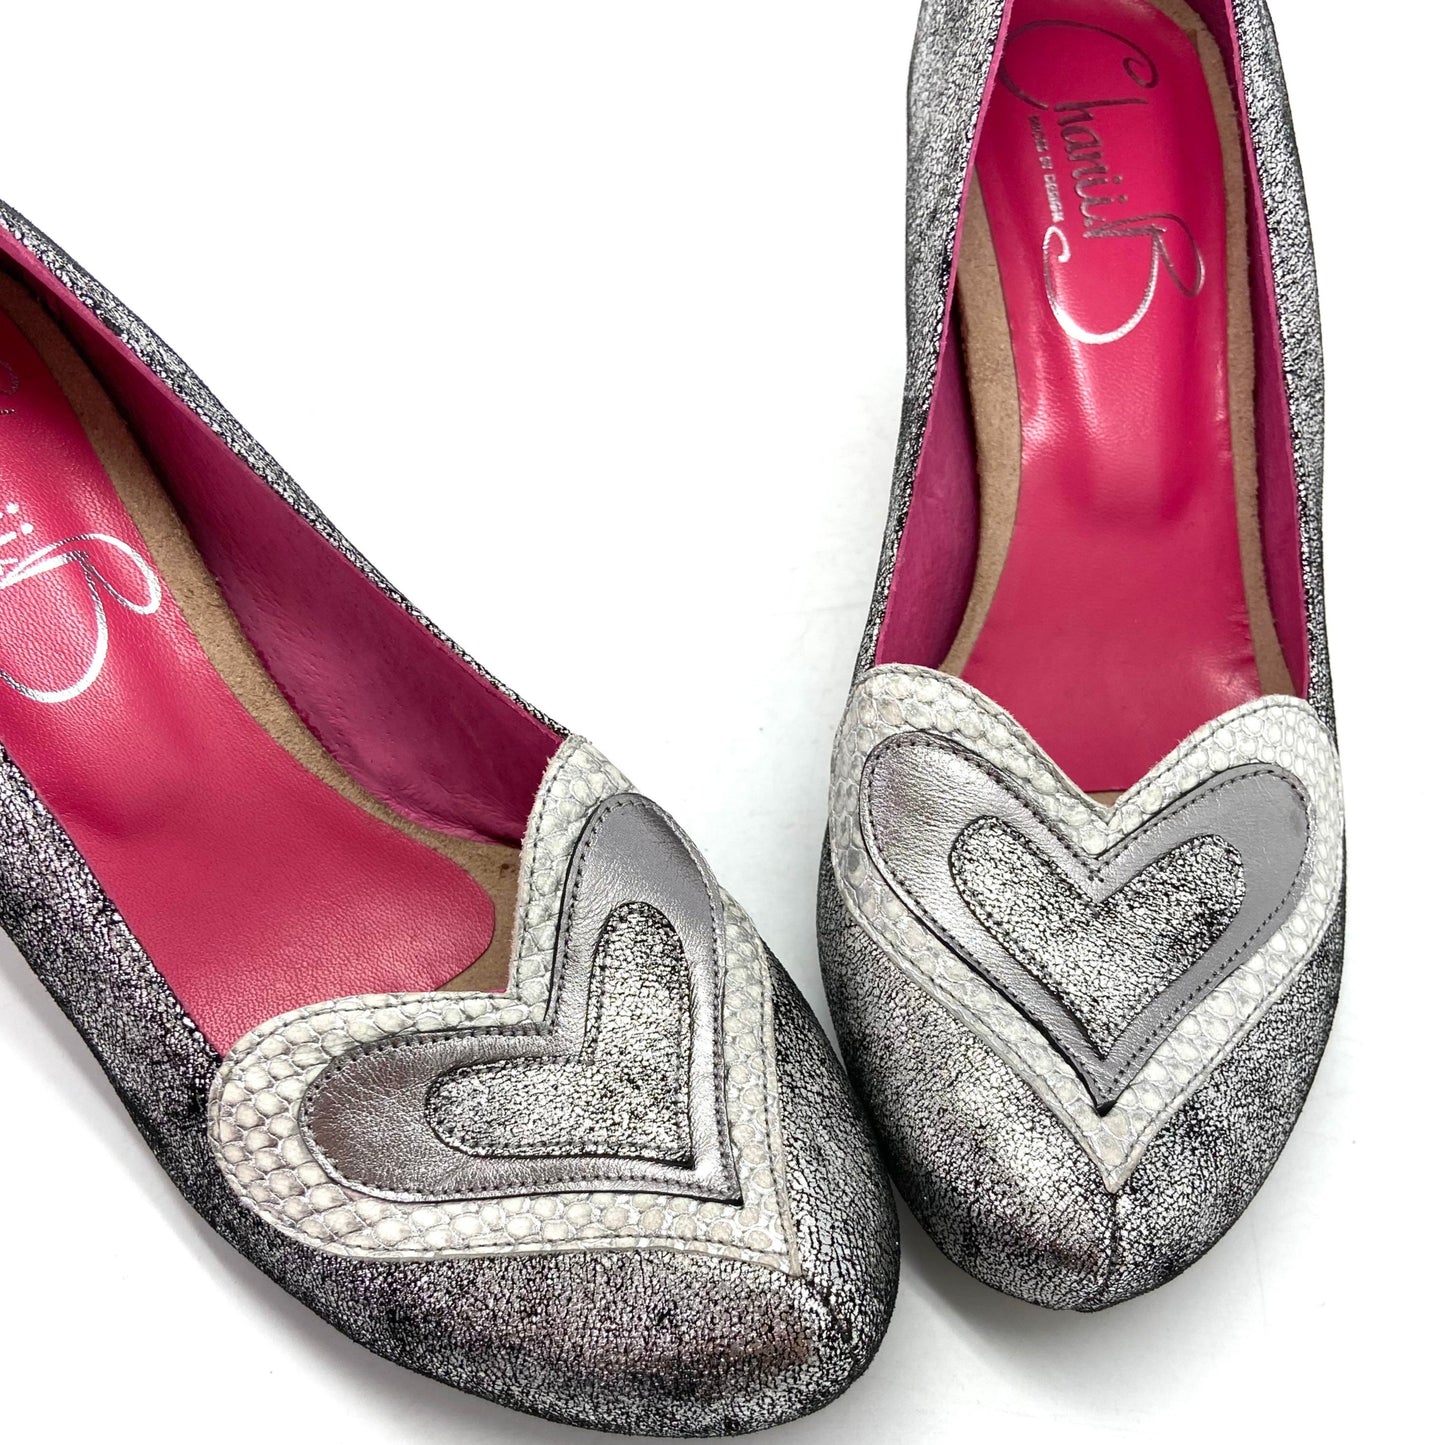 Amour - Brushed Silver shoe